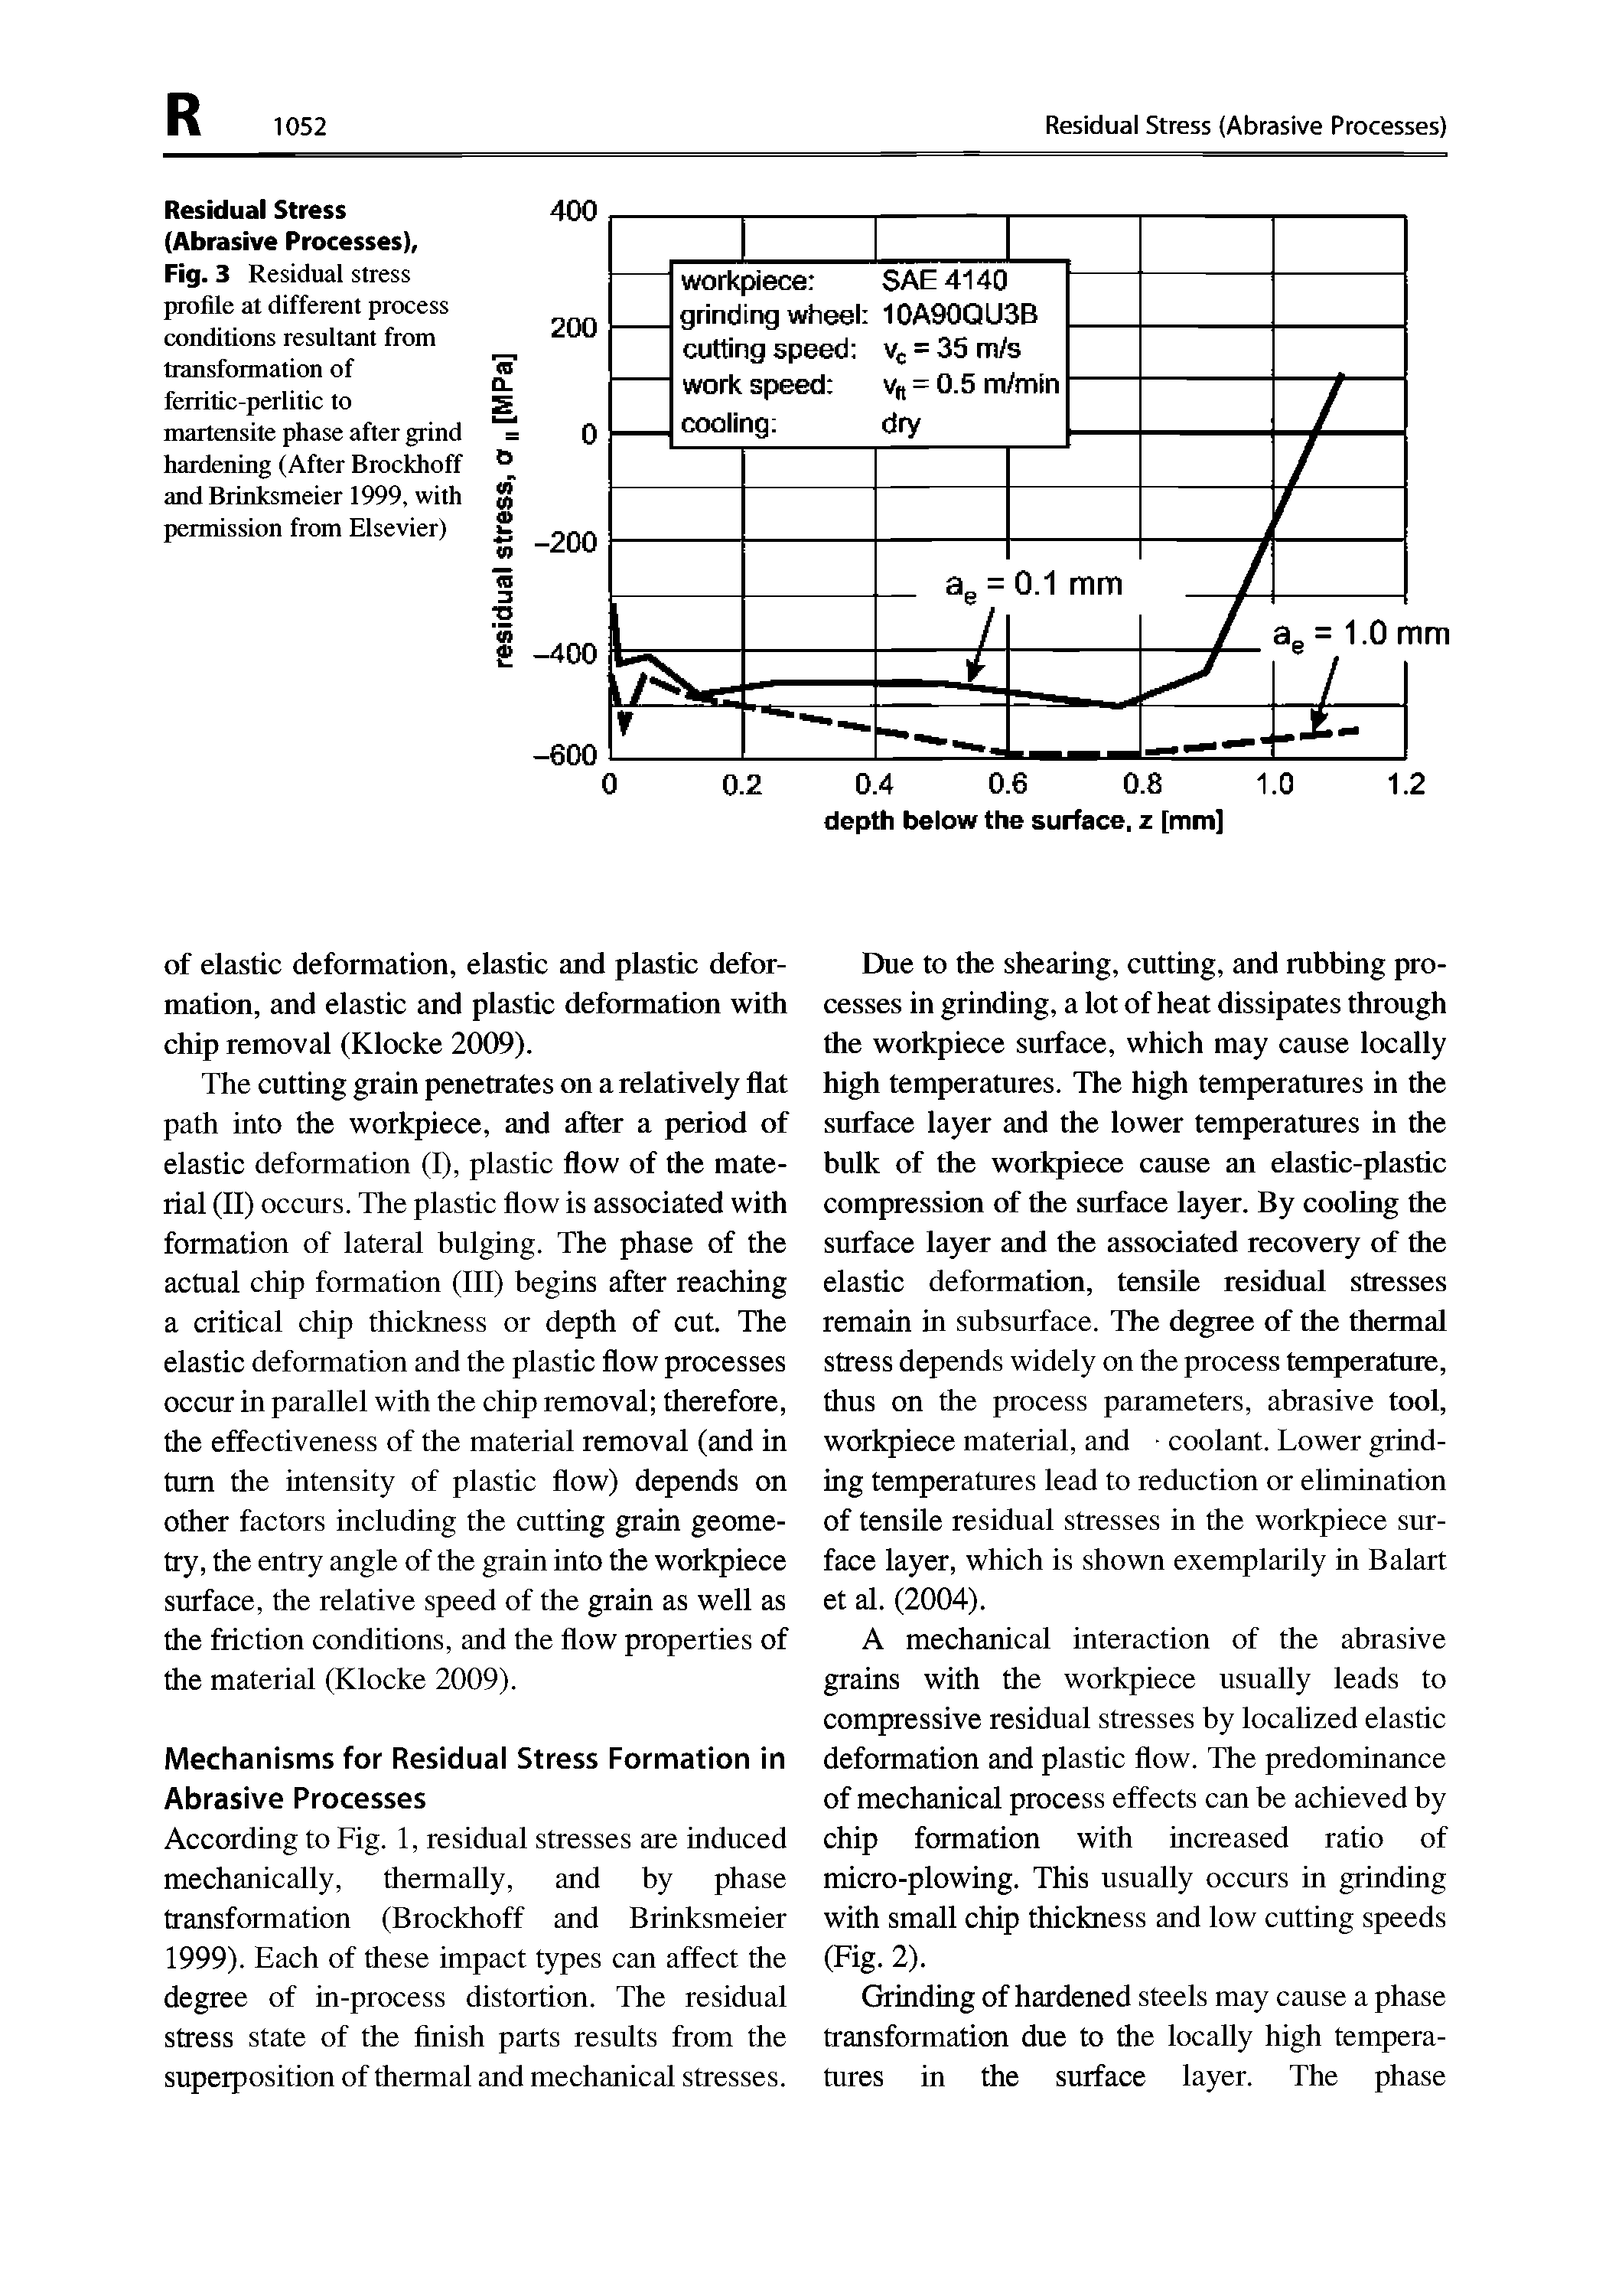 Fig. 3 Residual stress profile at different process conditions resultant from transformation of ferritic-perlitic to martensite phase after grind hardening (After Brockhoff and Brinksmeier 1999, with permission from Elsevier)...